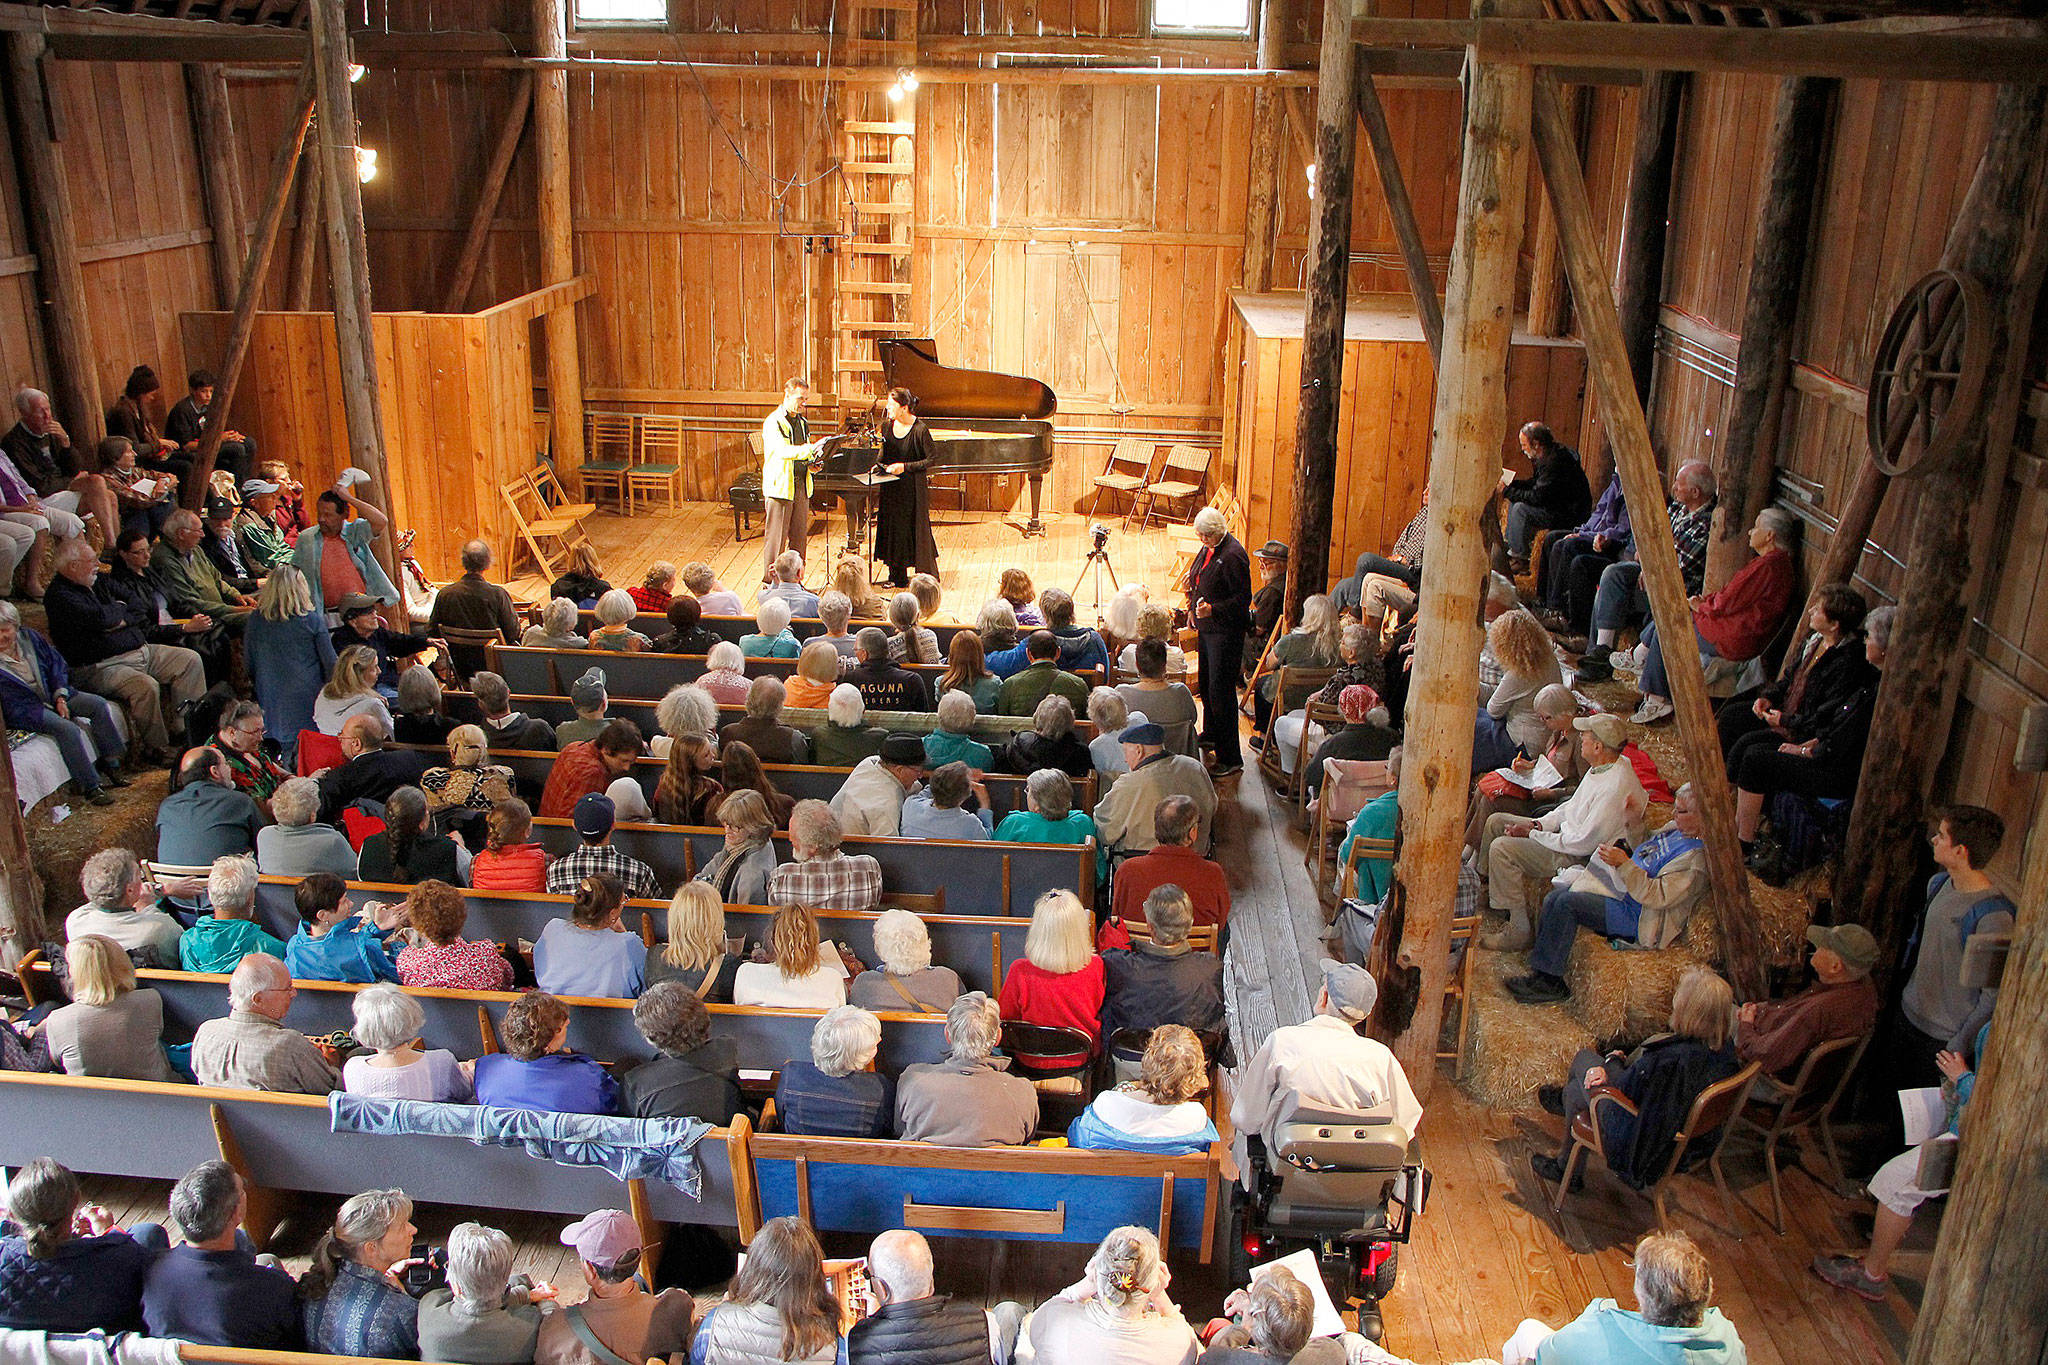 Historic Quilcene barn hosts free chamber music concerts